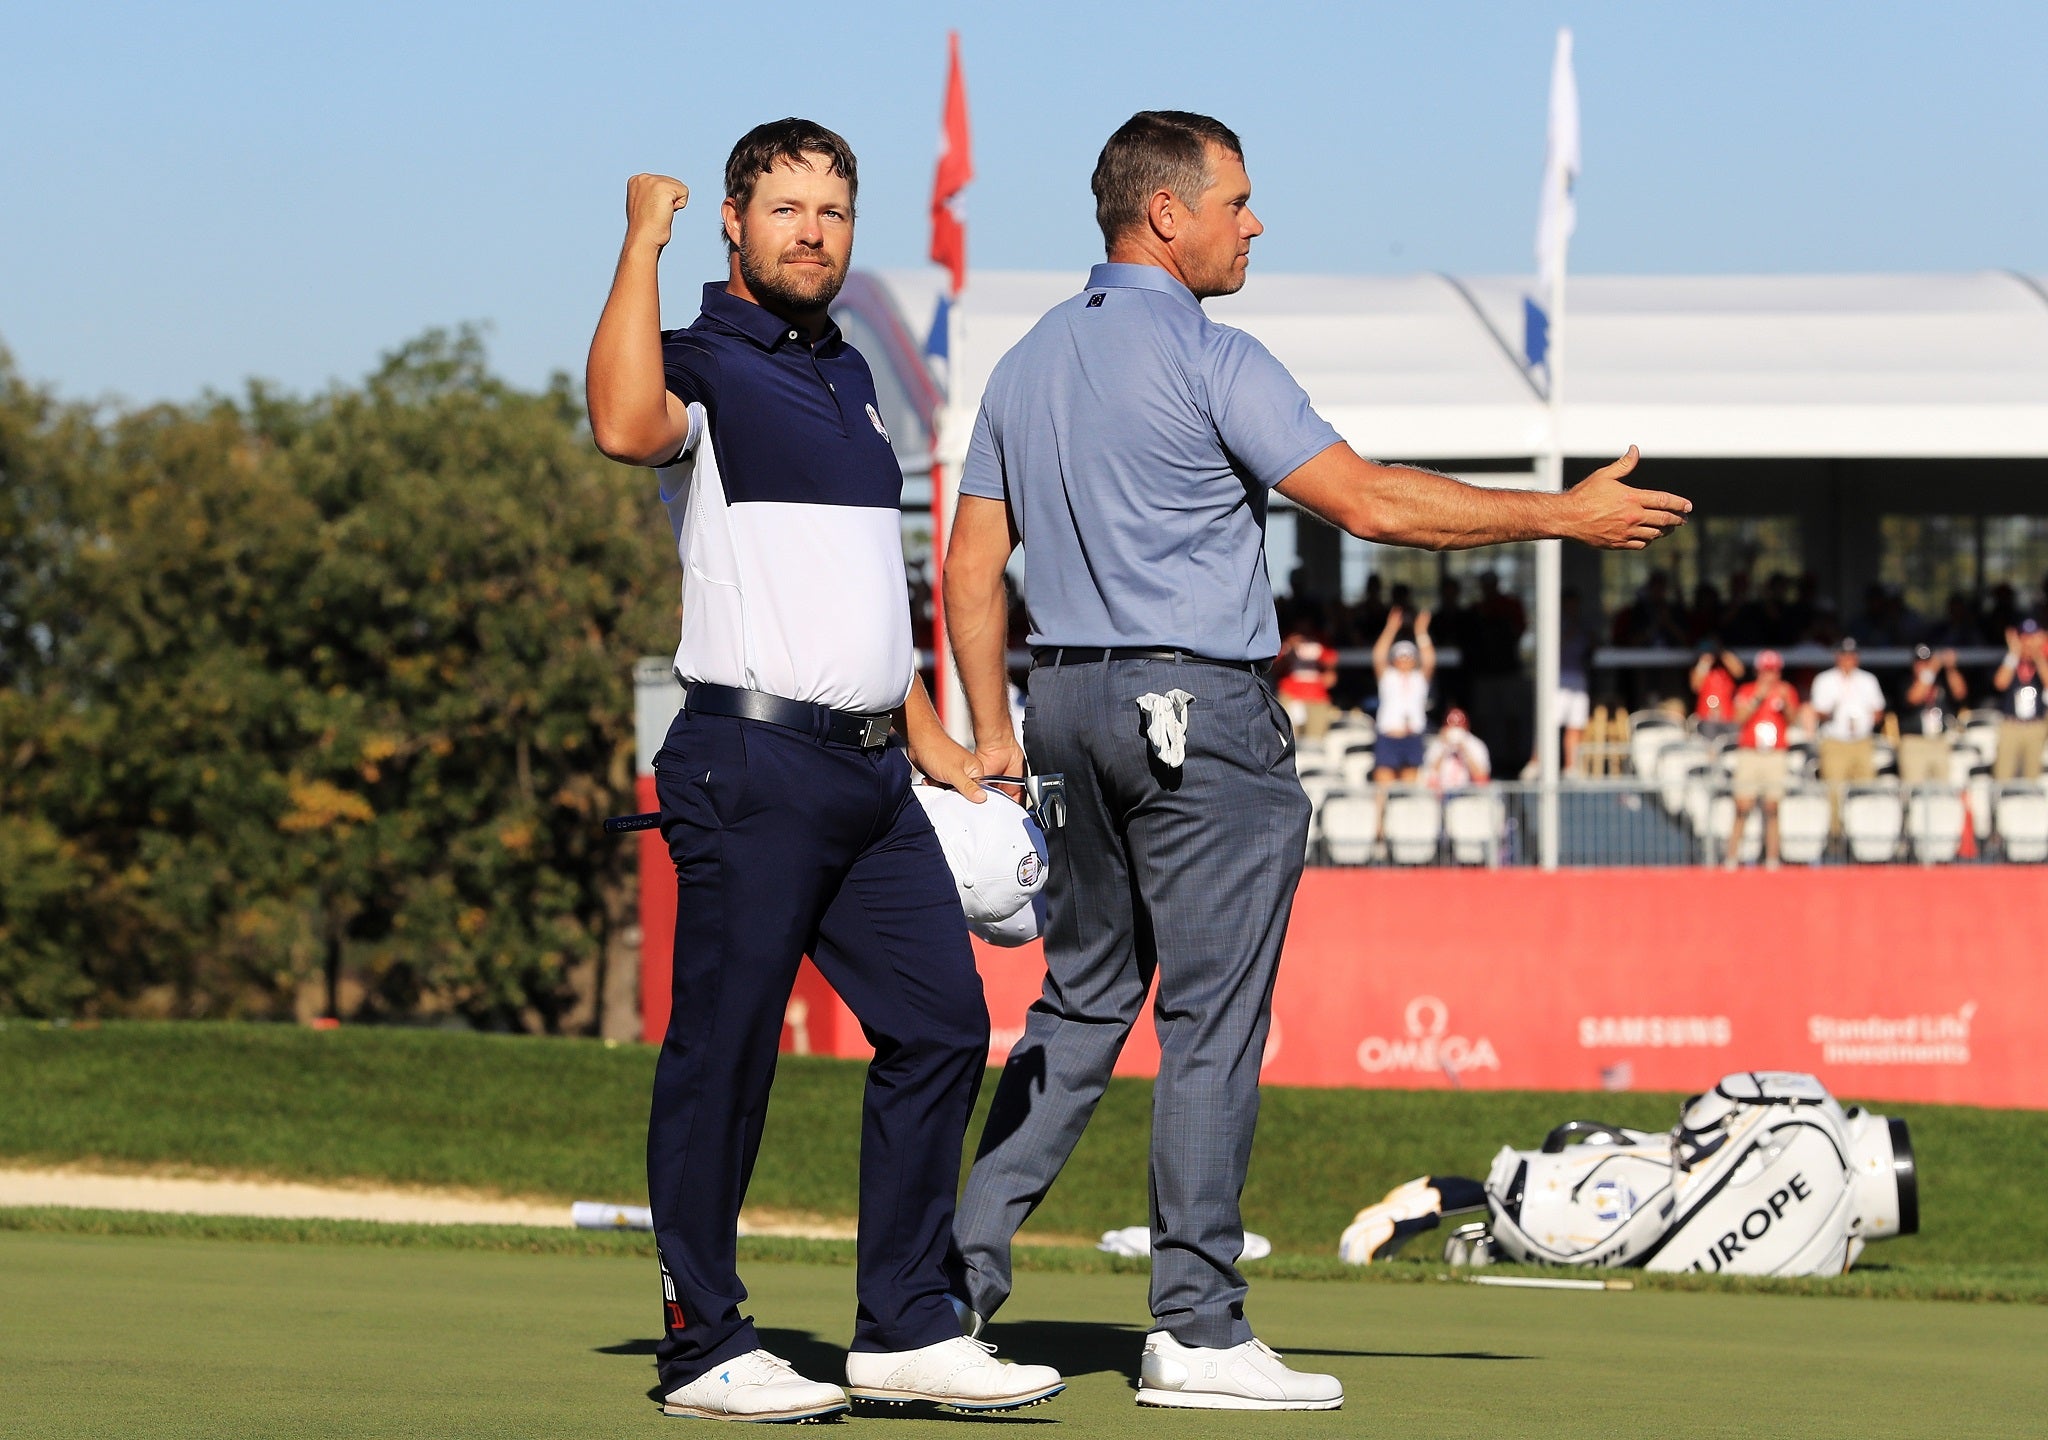 Ryan Moore celebrates securing the winning point for the USA in the Ryder Cup